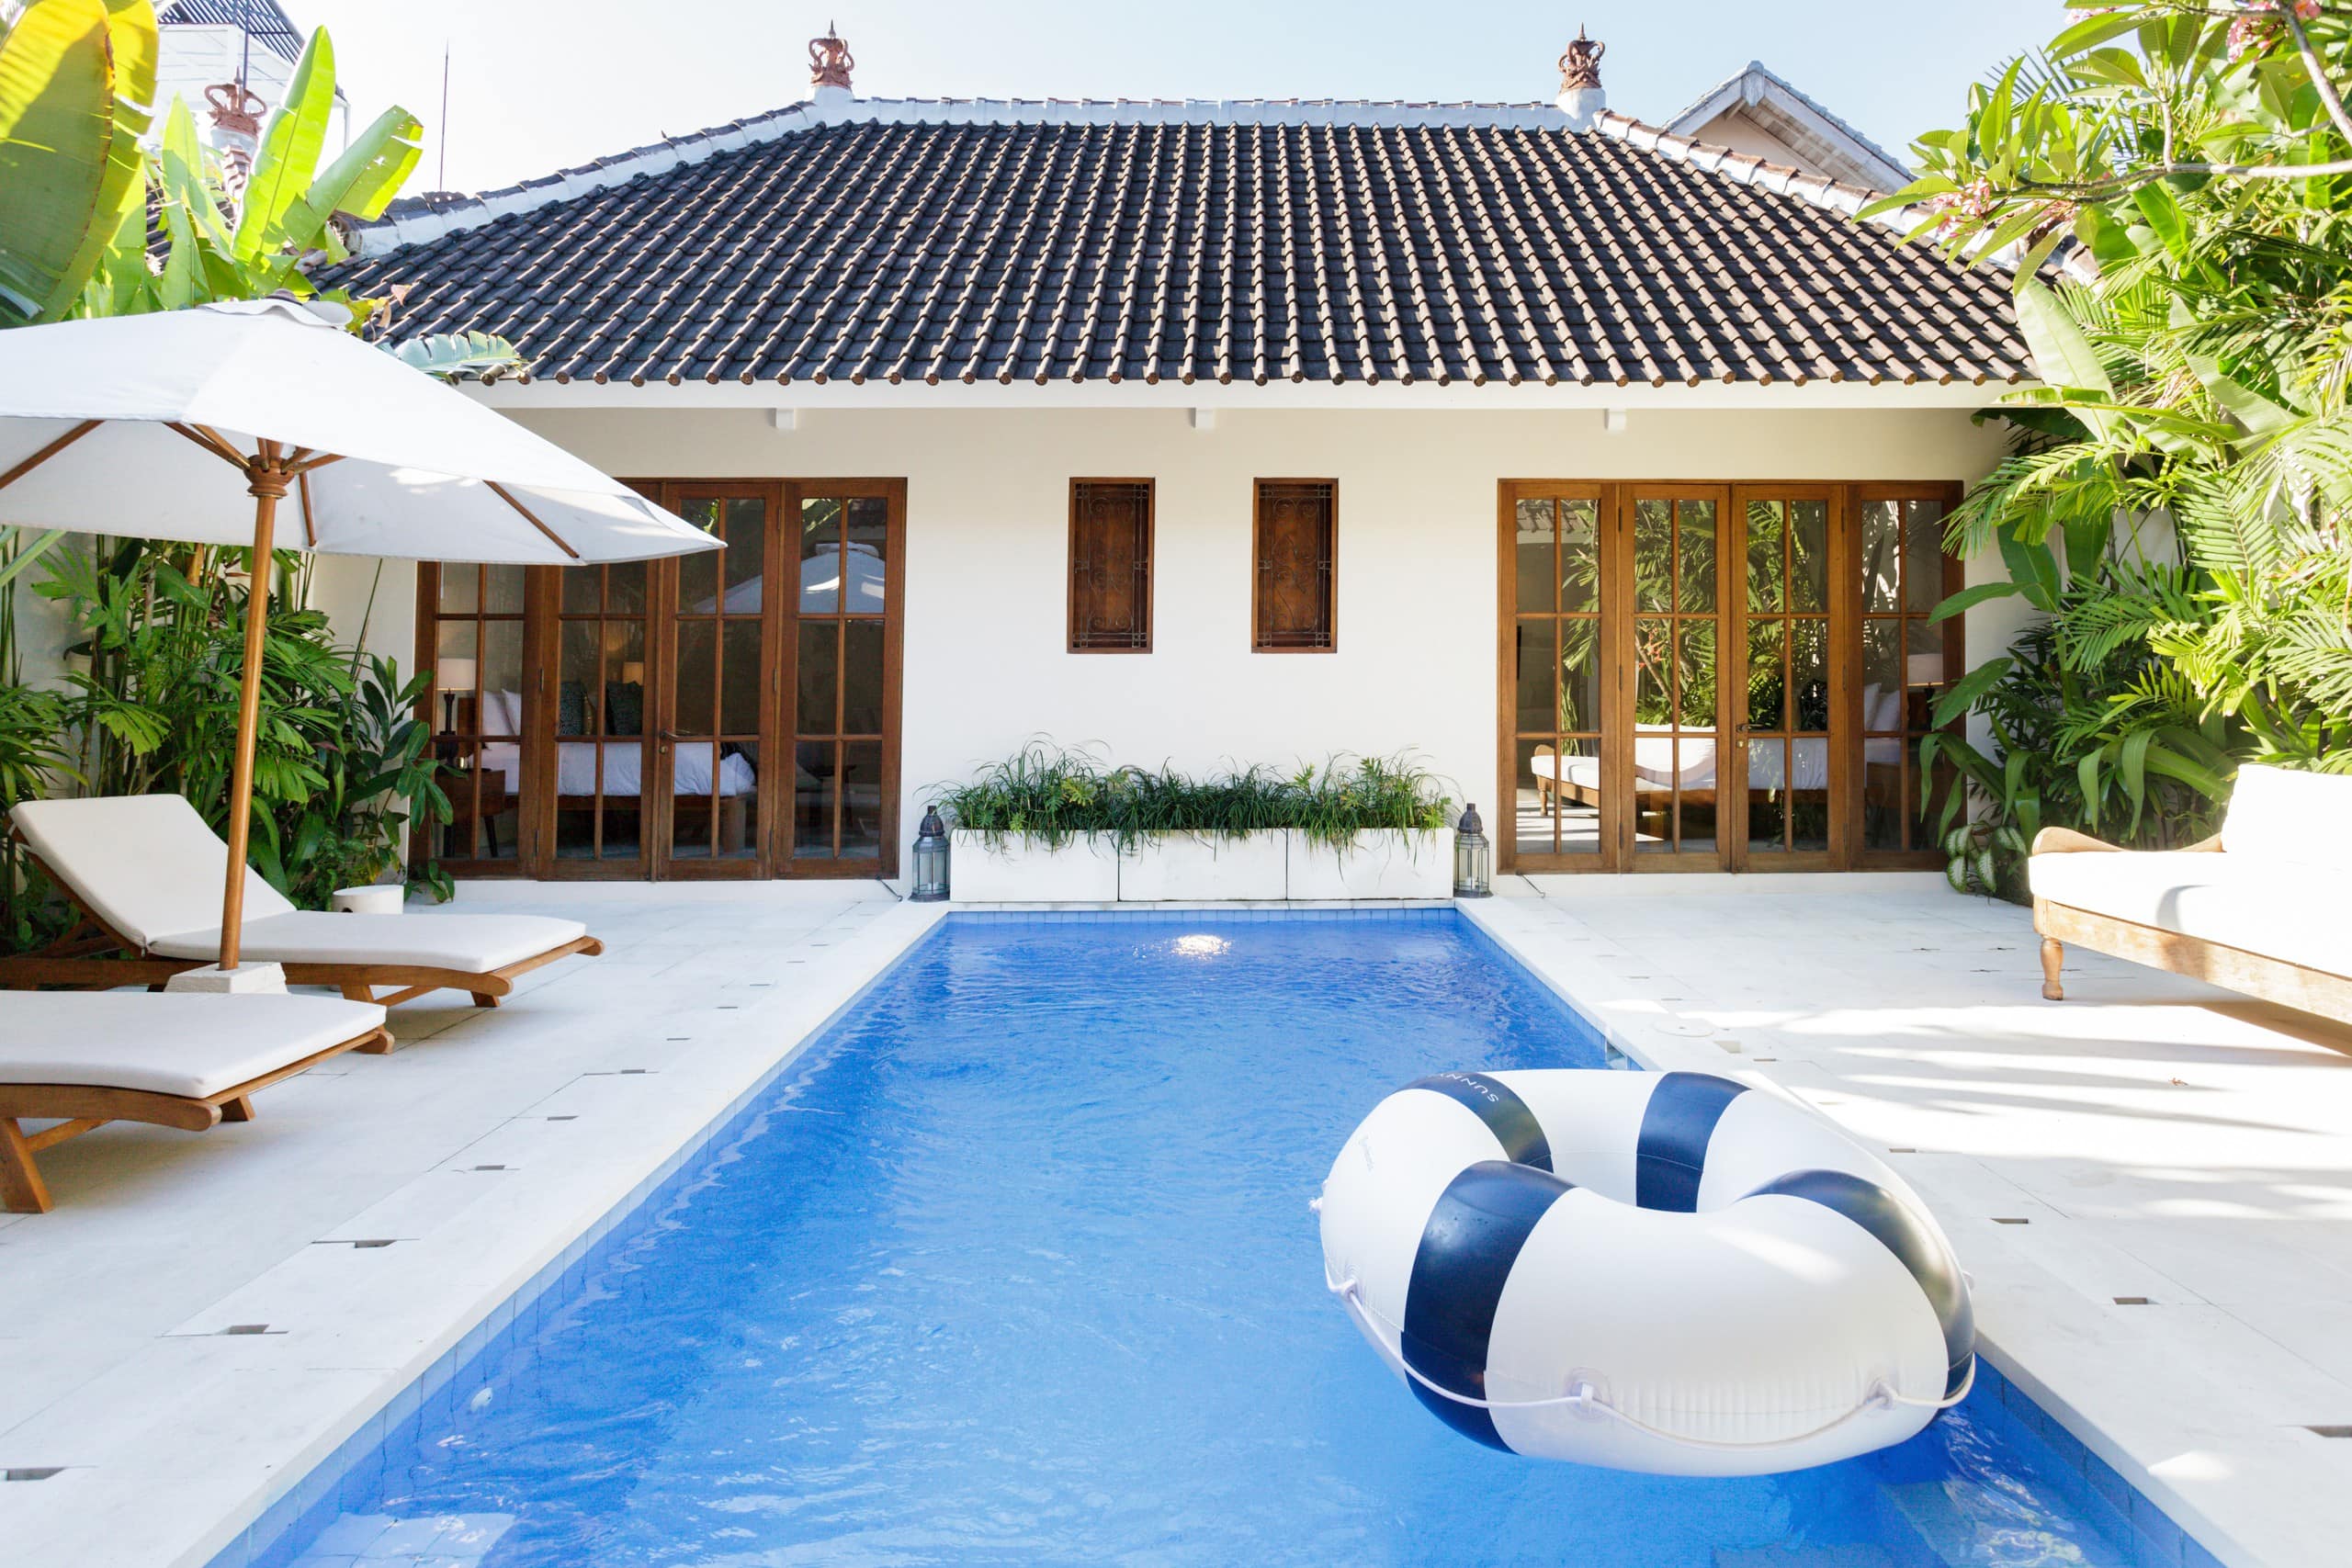 Property Image 2 - Float in Secluded Pool at Luxury Villa in Seminyak